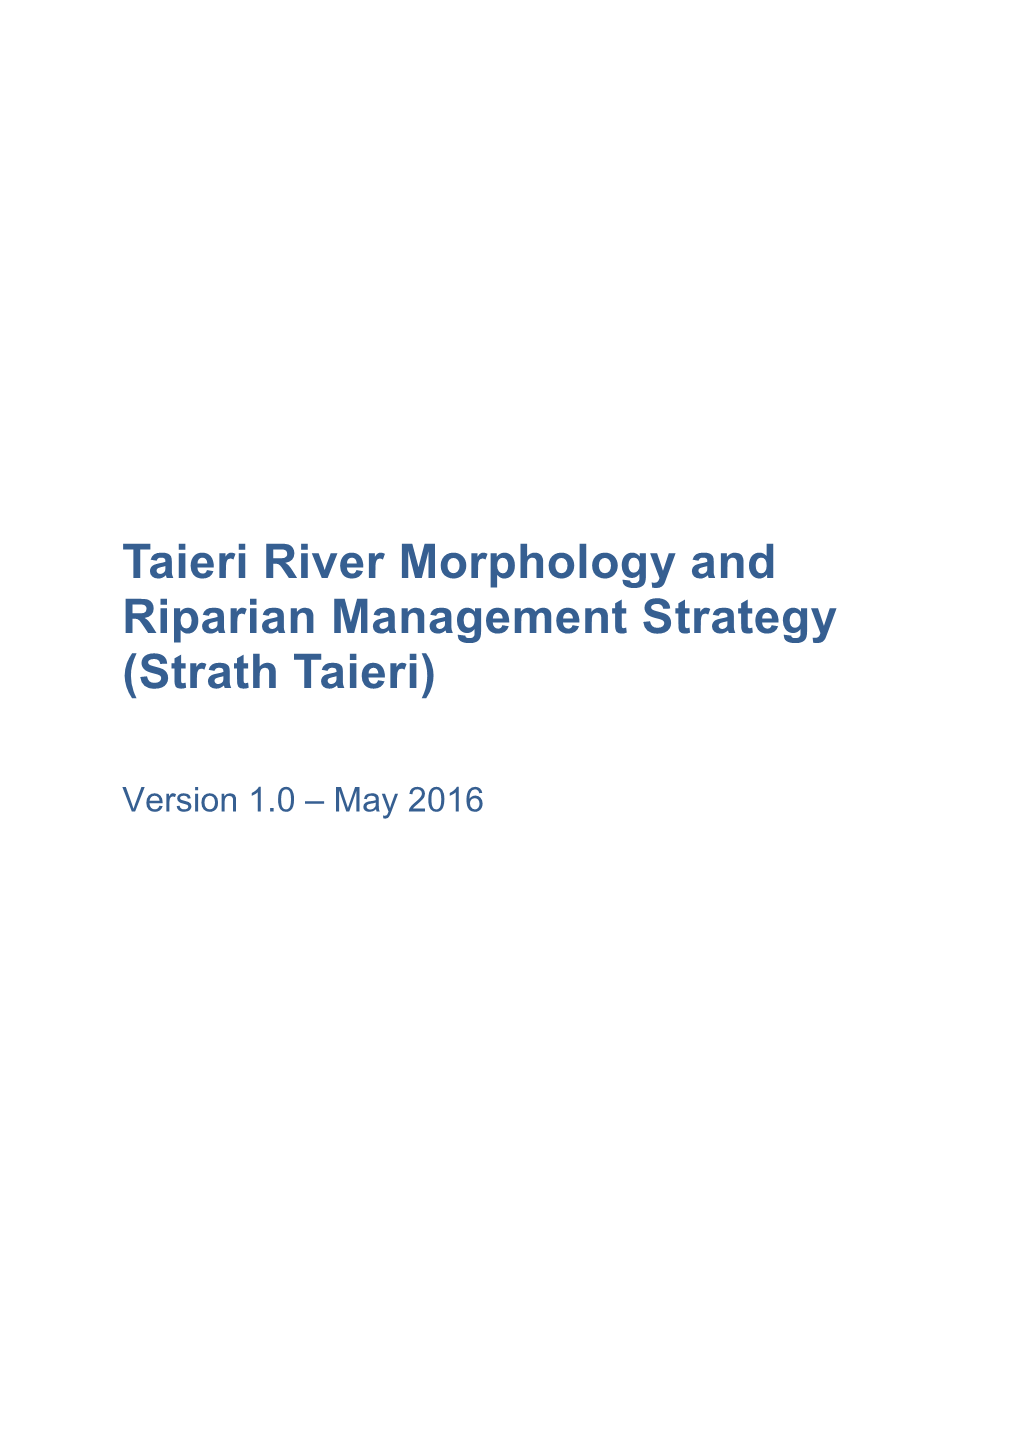 Taieri River Morphology and Riparian Management Strategy (Strath Taieri)